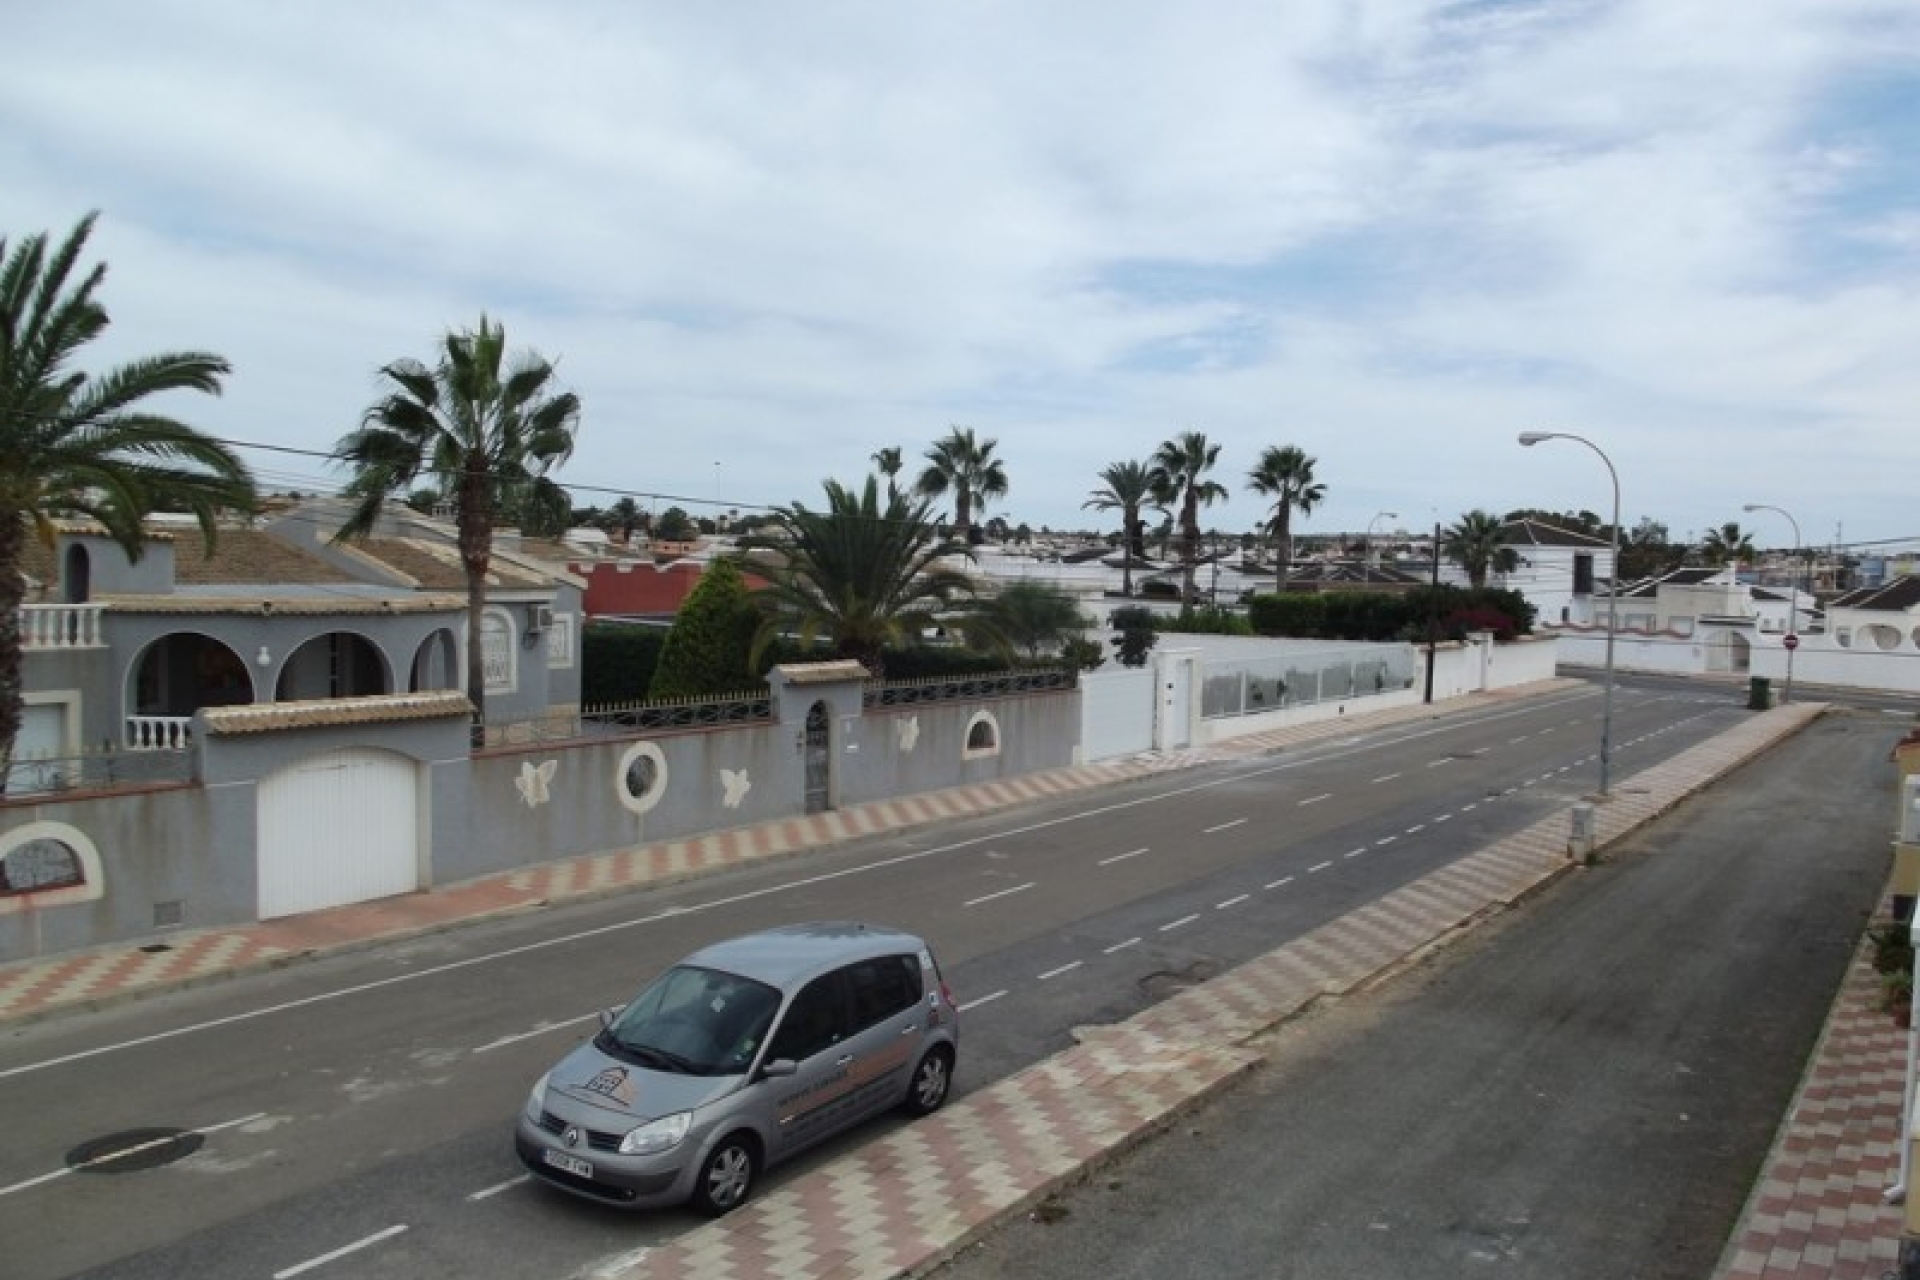 For sale cheap bargain property Costa Blanca Spain